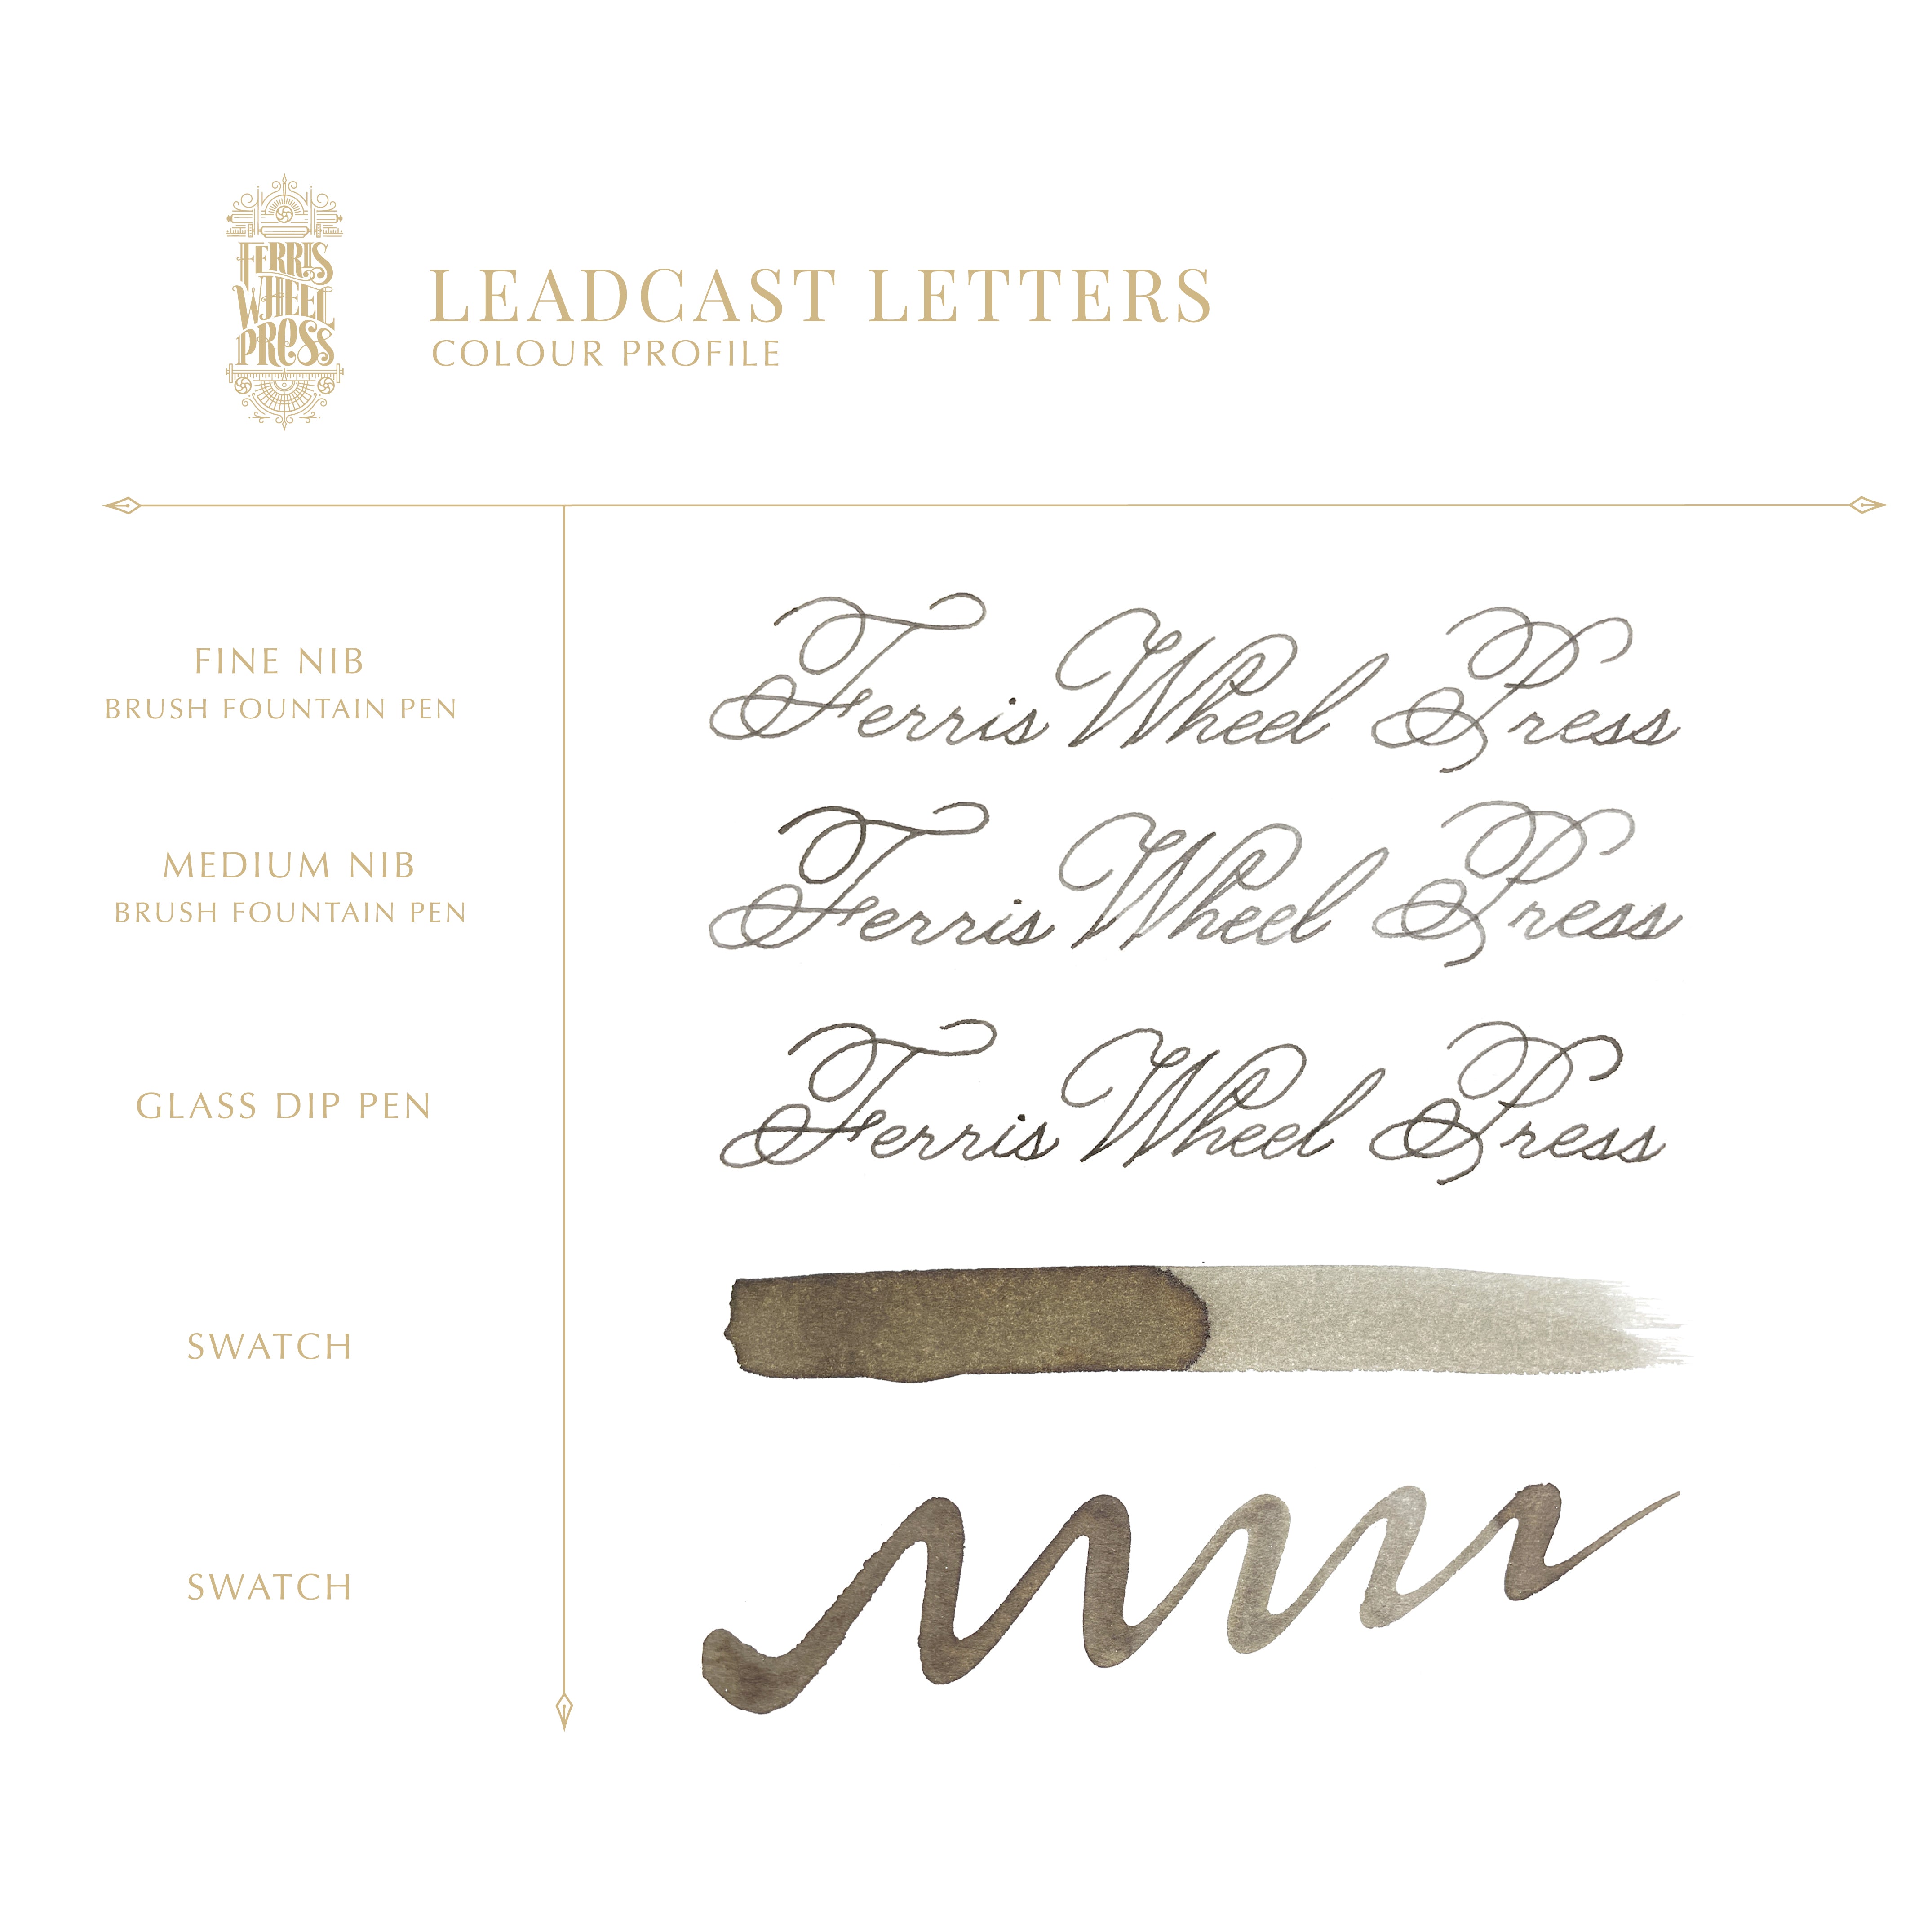 Leadcast Letters